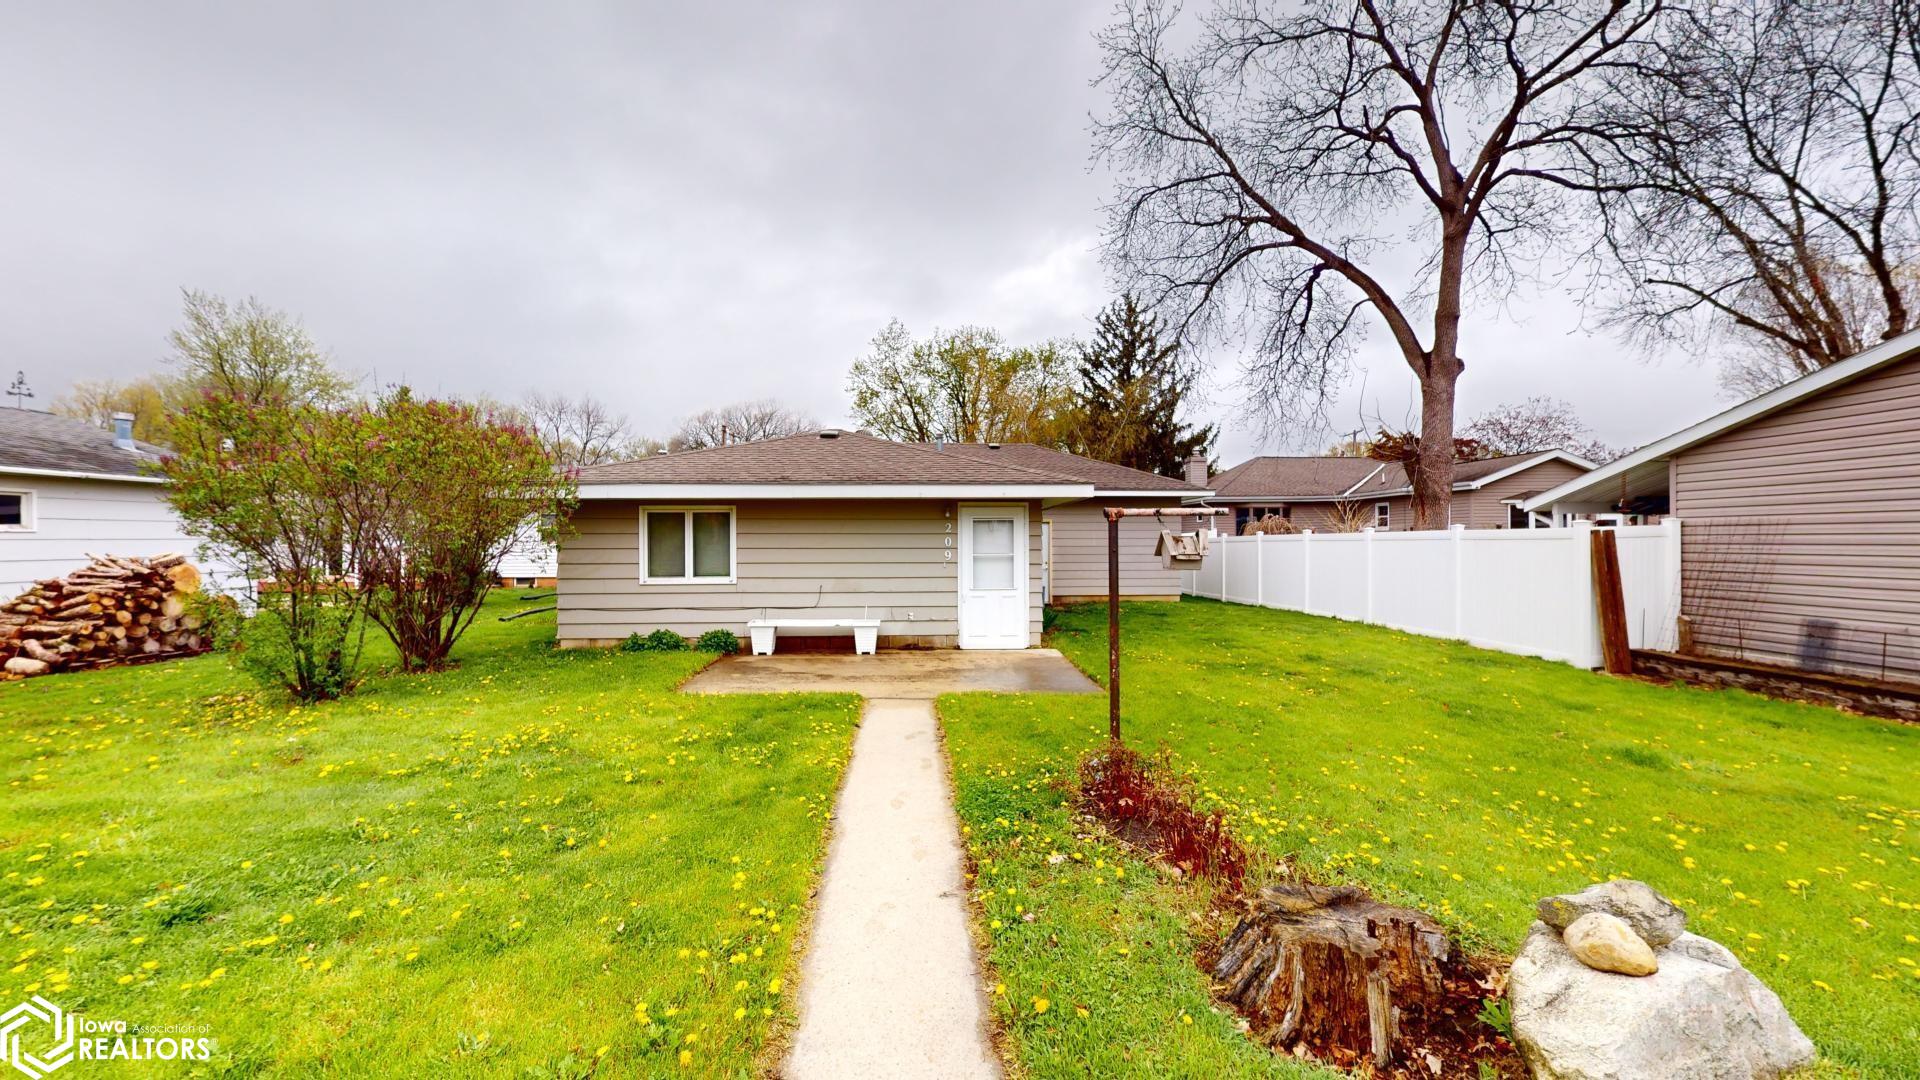 209 23Rd, Mason City, Iowa 50401, 2 Bedrooms Bedrooms, ,1 BathroomBathrooms,Single Family,For Sale,23Rd,6316790